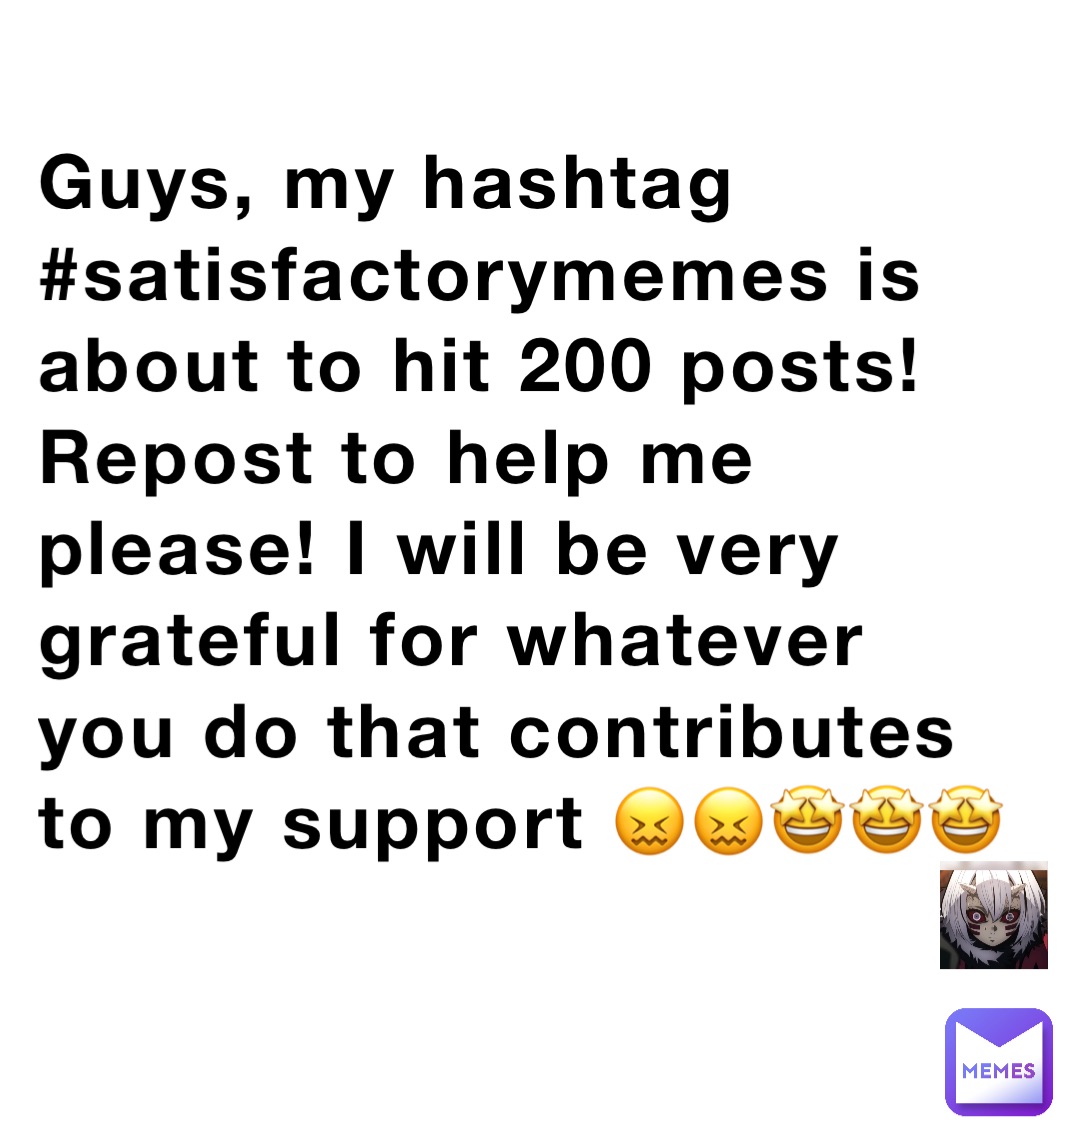 Guys, my hashtag #satisfactorymemes is about to hit 200 posts! Repost to help me please! I will be very grateful for whatever you do that contributes to my support 😖😖🤩🤩🤩